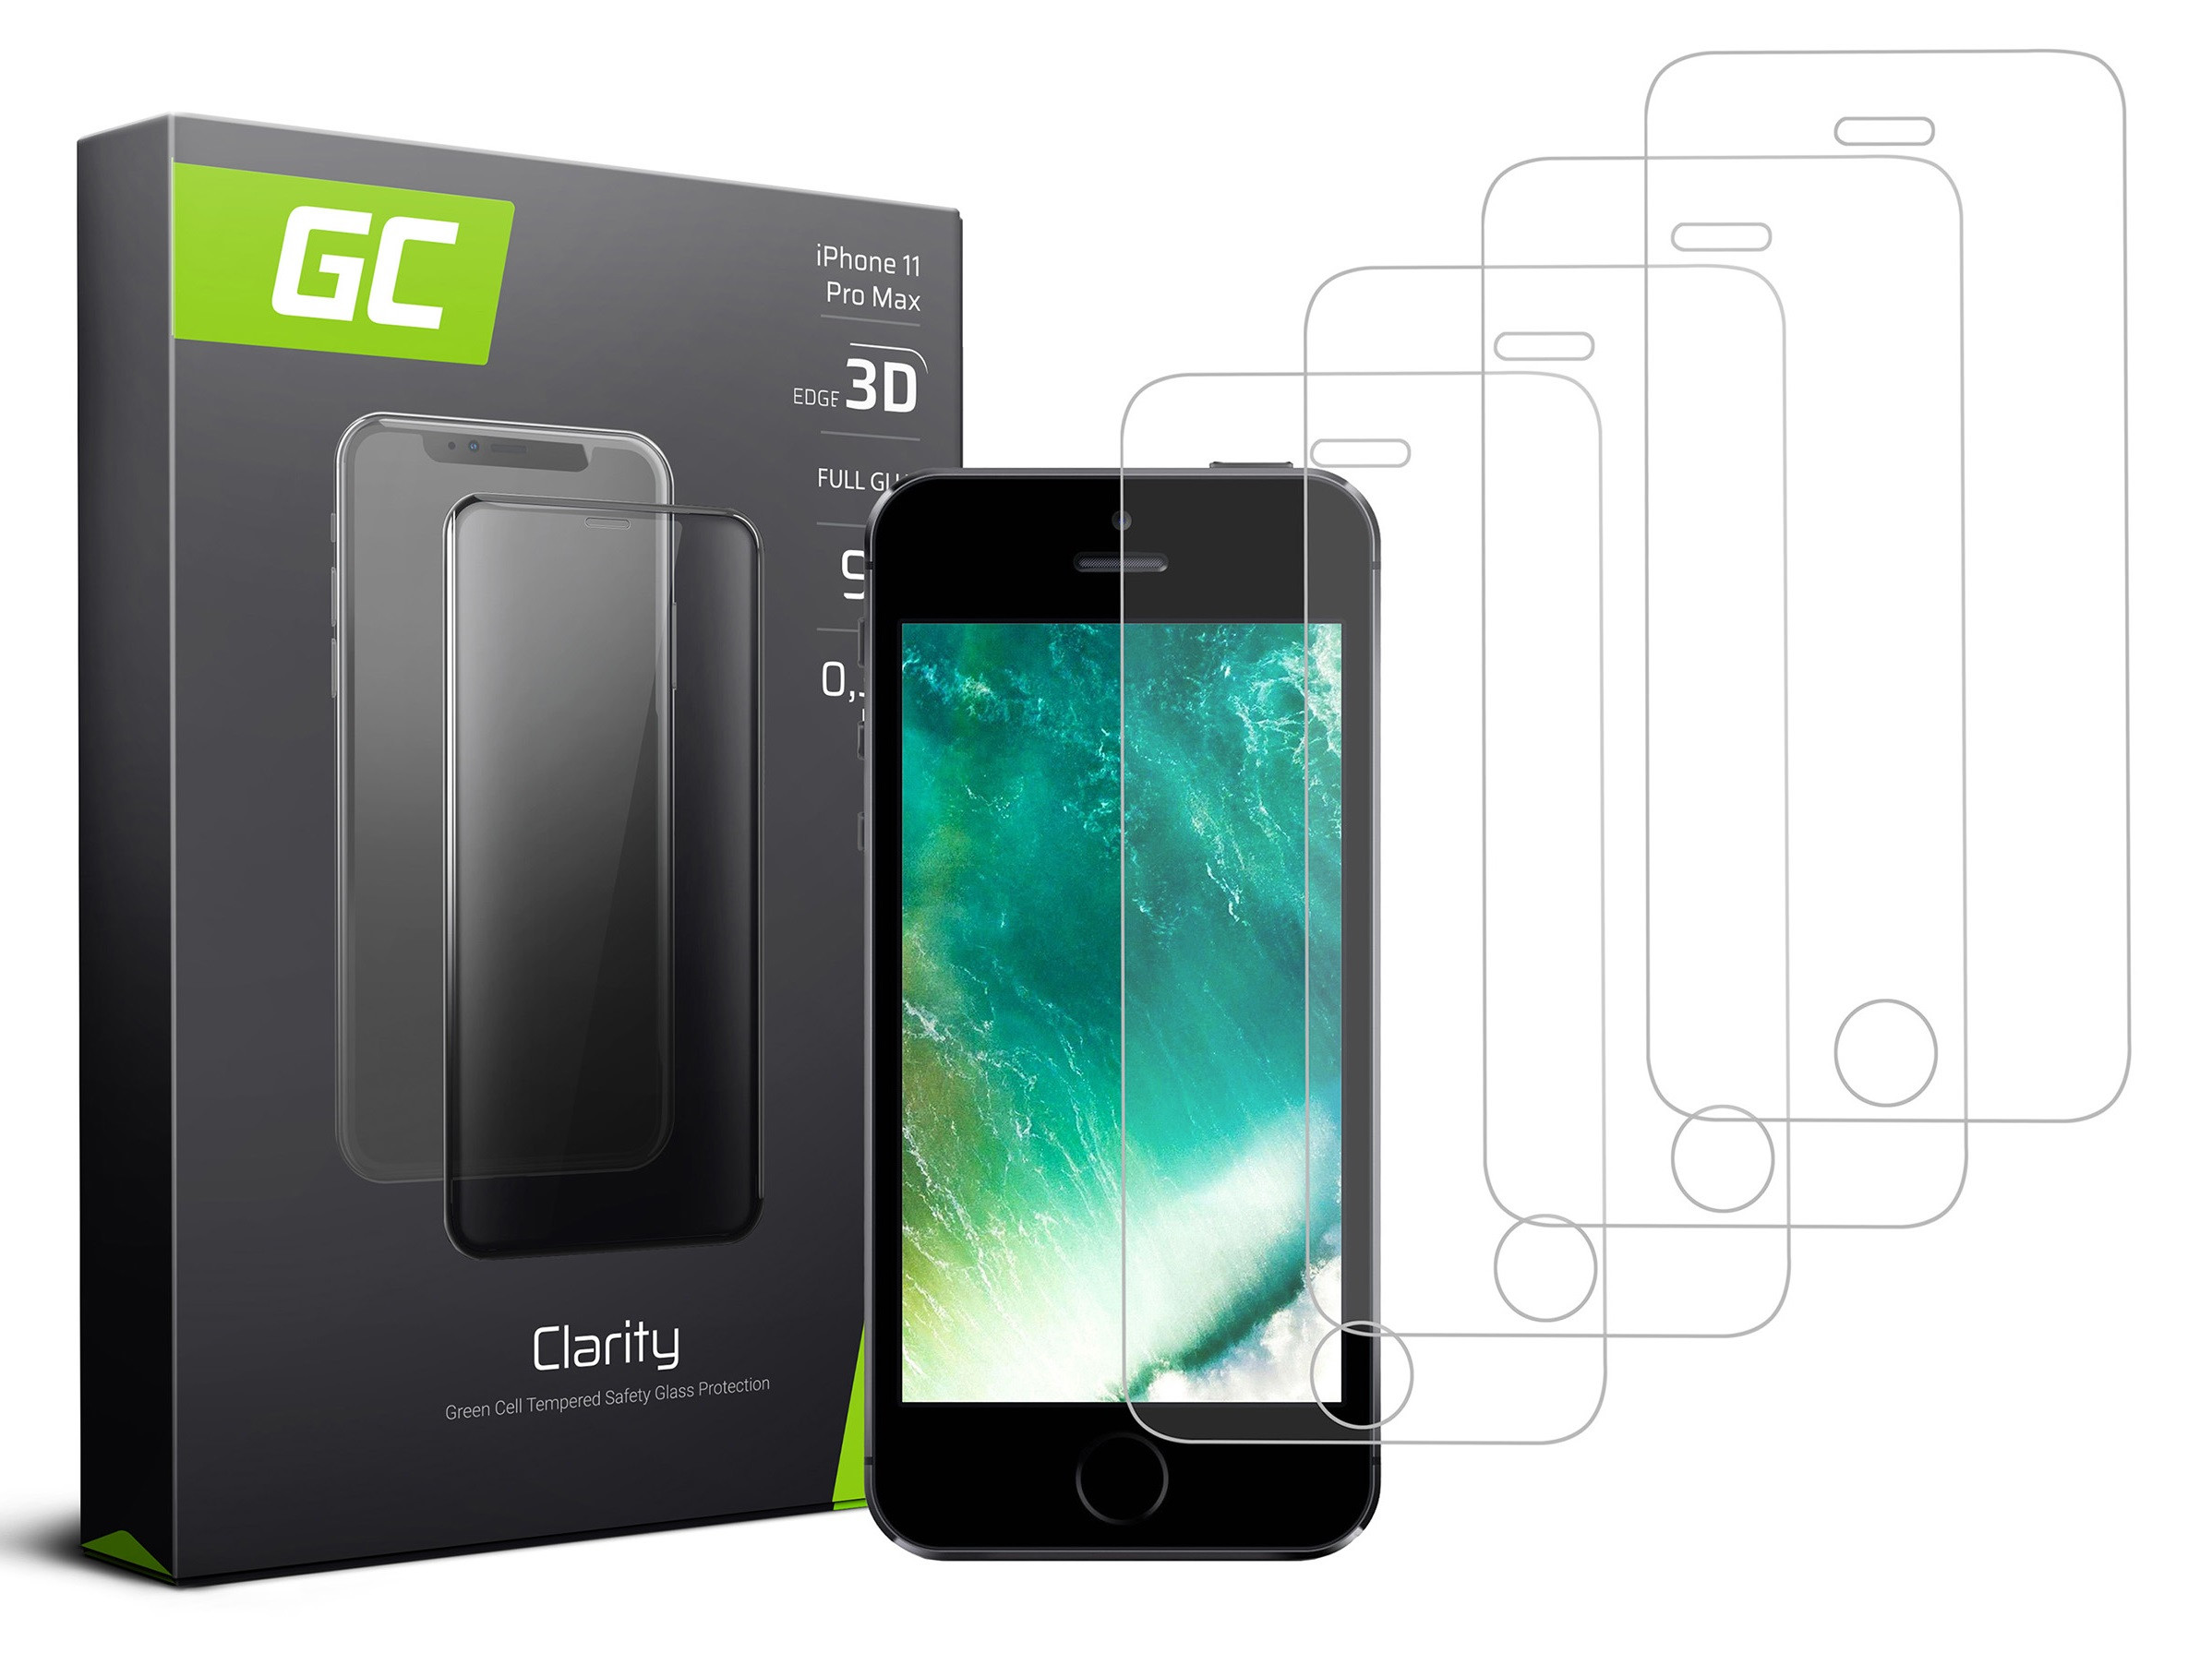 4x Screen protection GC Clarity for iPhone 5 / 5S / 5C / SE